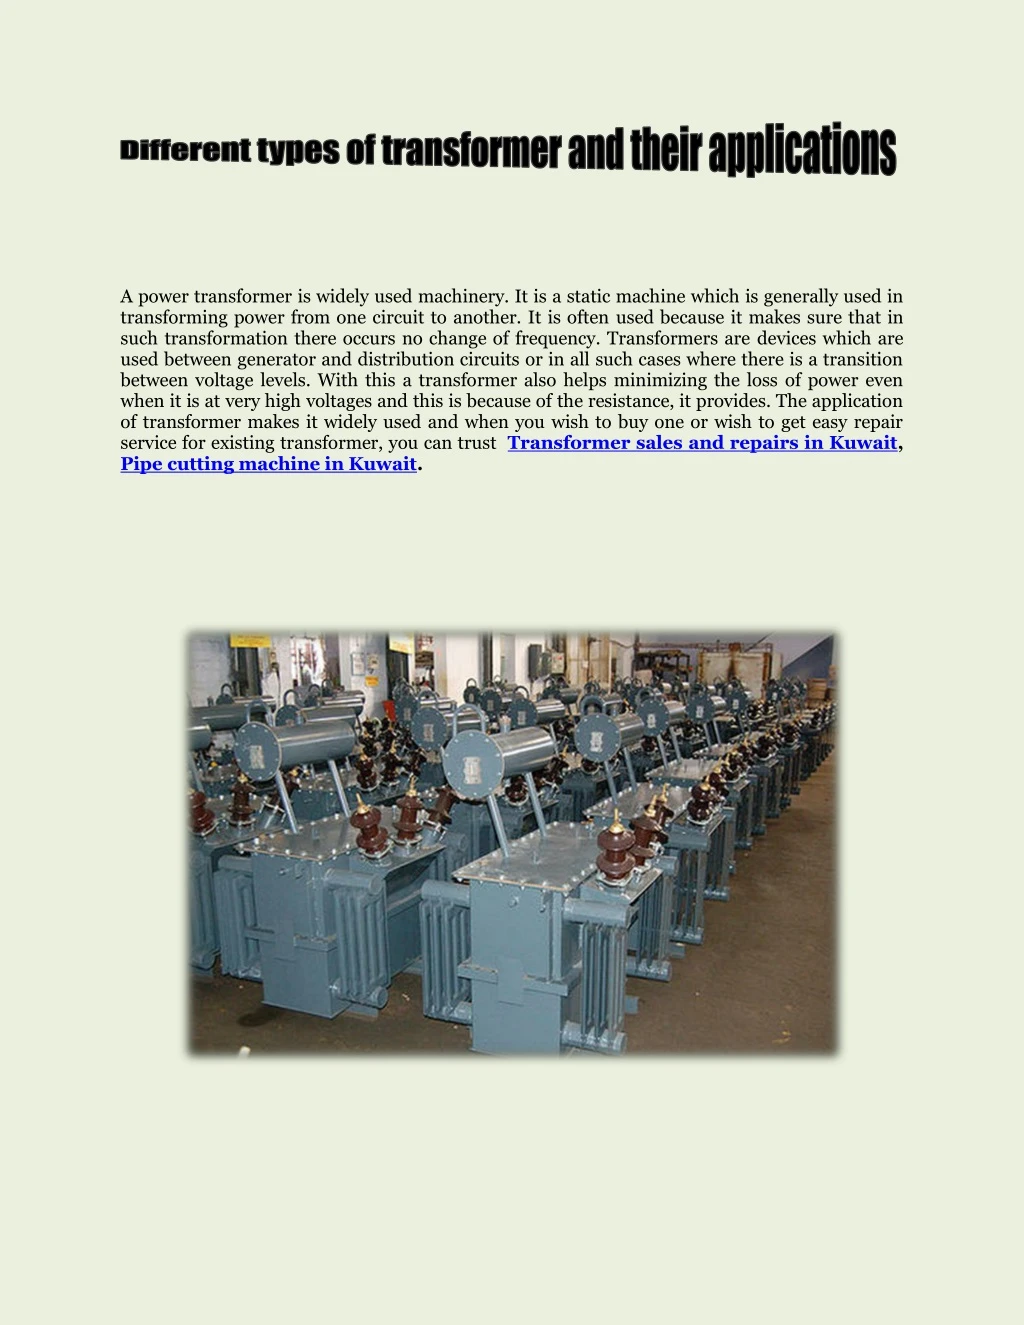 a power transformer is widely used machinery